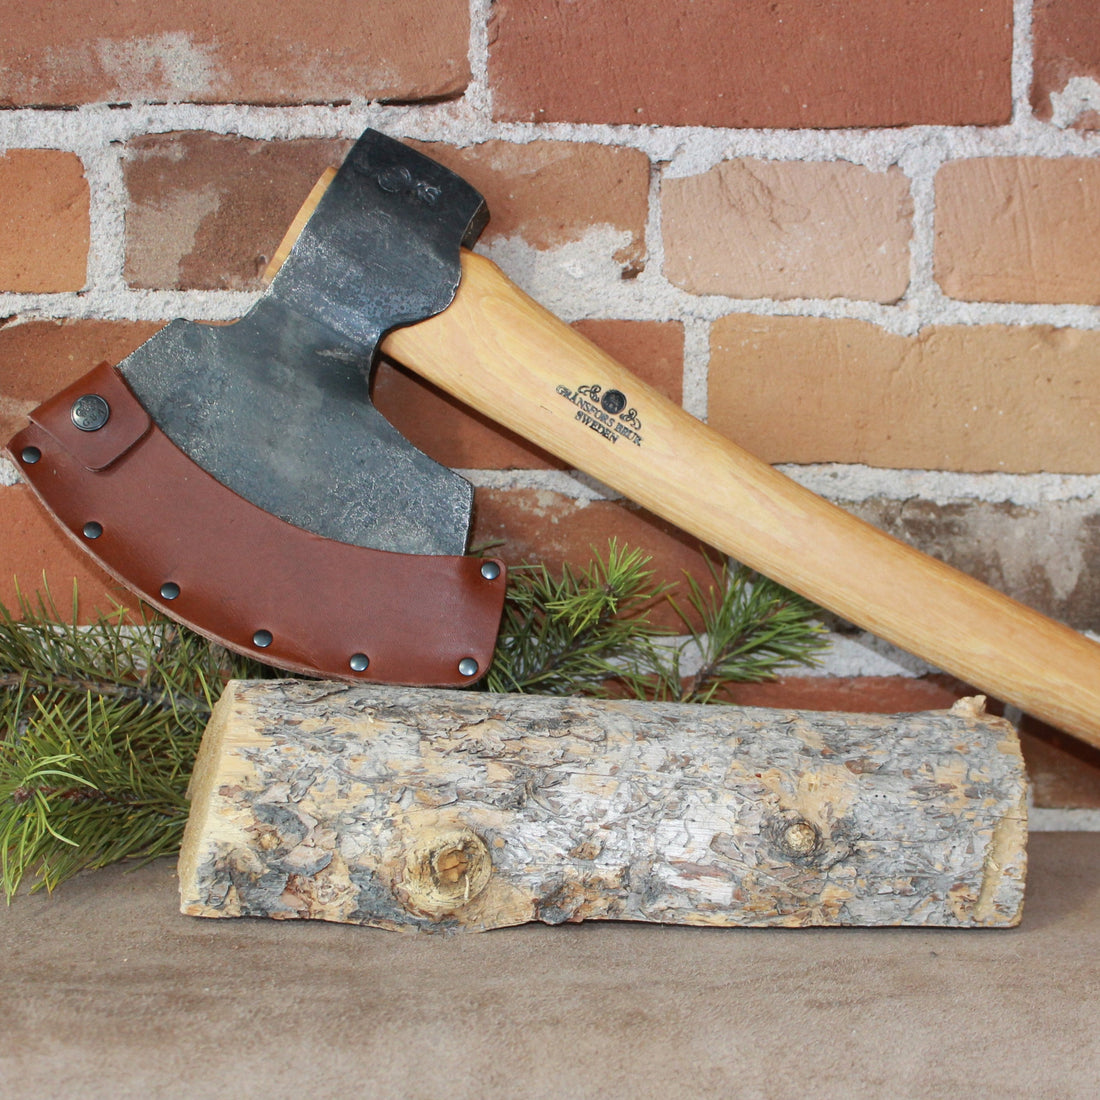 Gränsfors Bruk Broad Axe 1900 Right-Angled Sharpened Bevel On Right view of axe